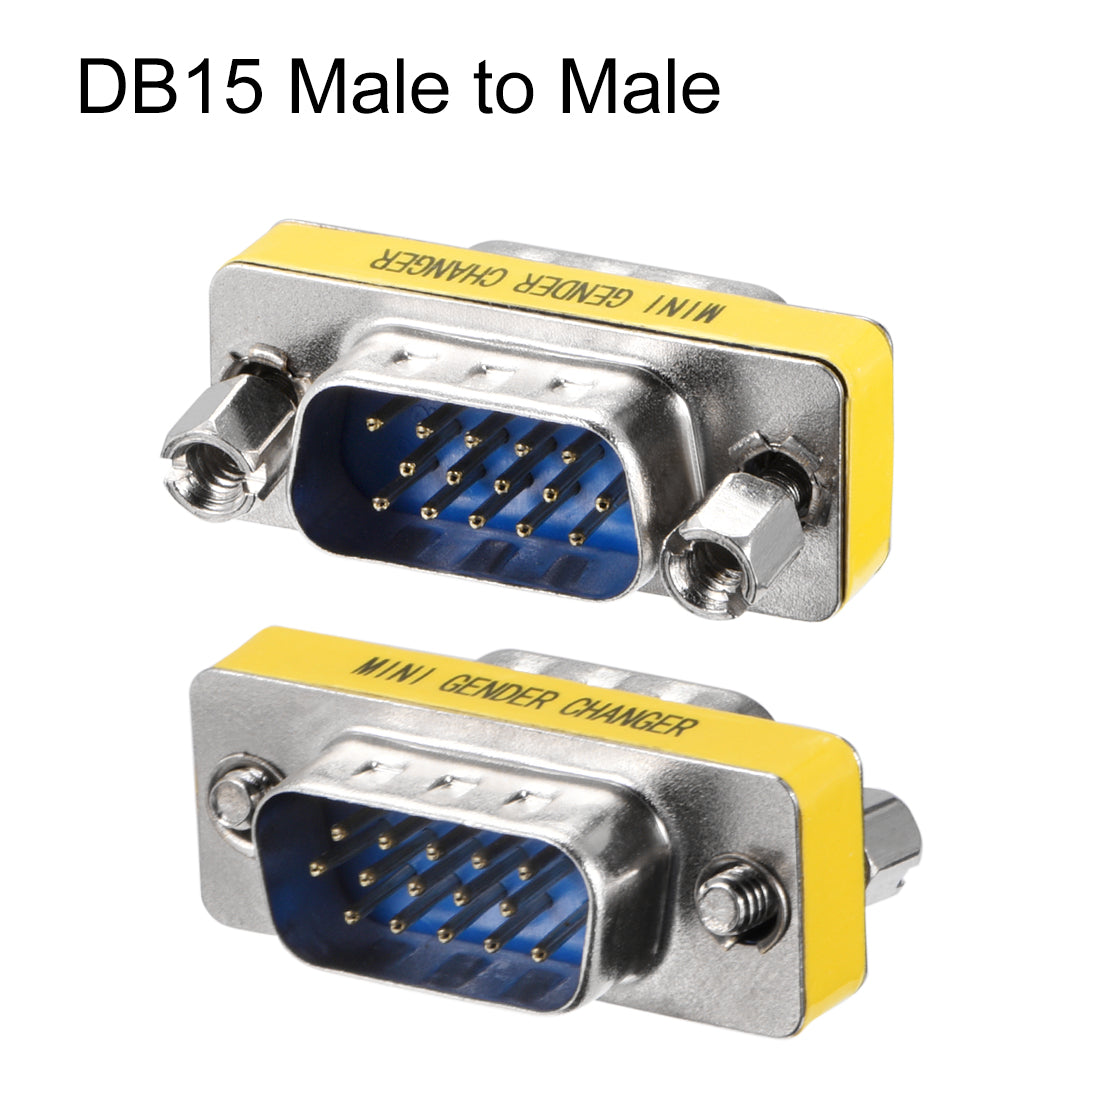 uxcell Uxcell DB15 VGA Gender Changer 15 Pin Male to Male 3-row Mini Gender Changer Coupler Adapter Connector for Serial Applications Blue